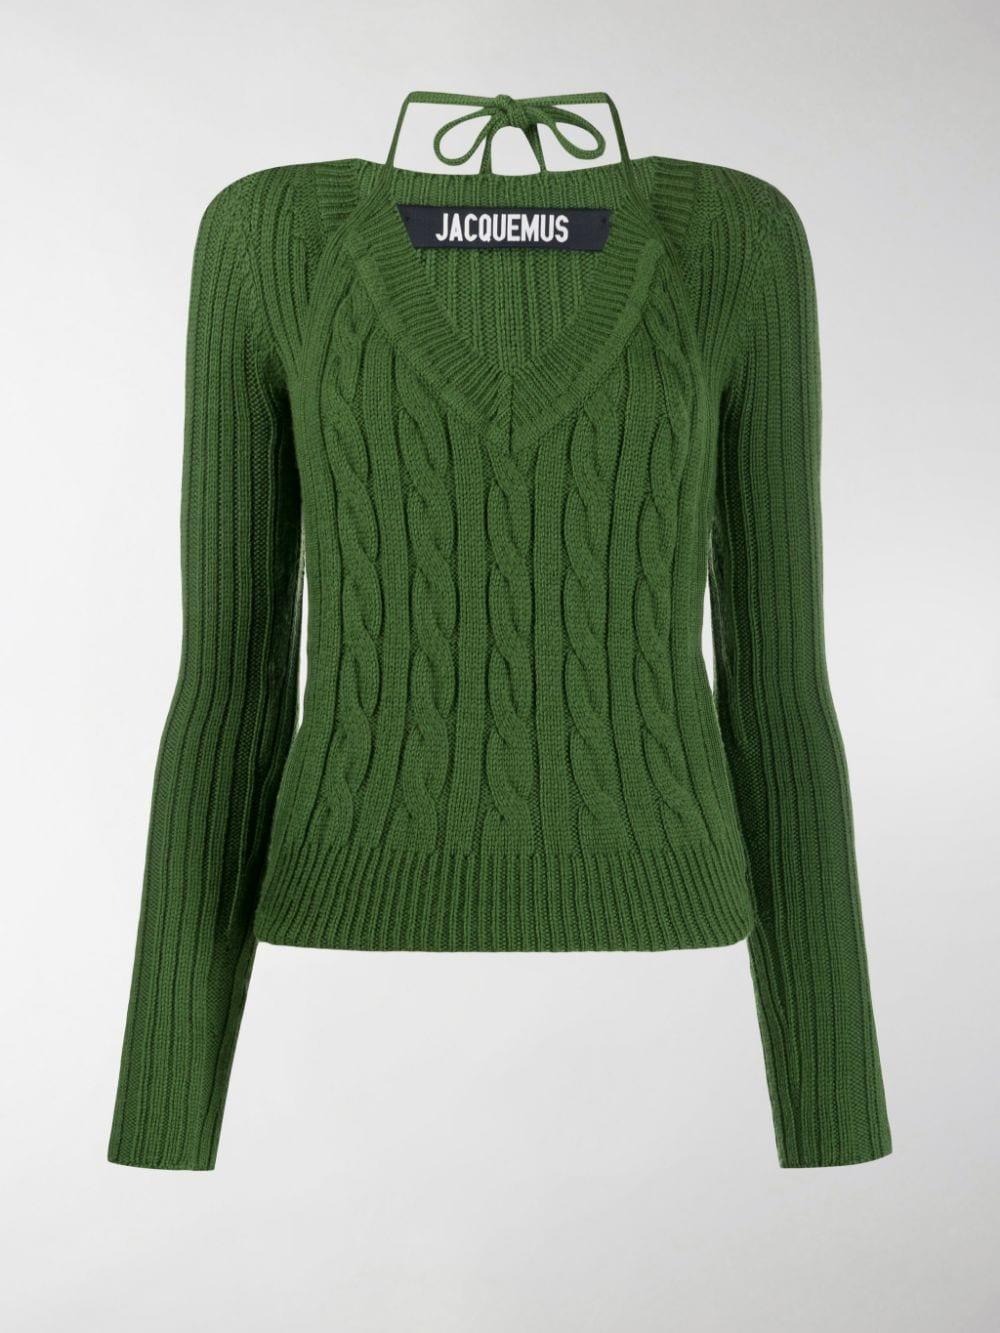 Jacquemus Layered Cable-knit Jumper in Green - Lyst